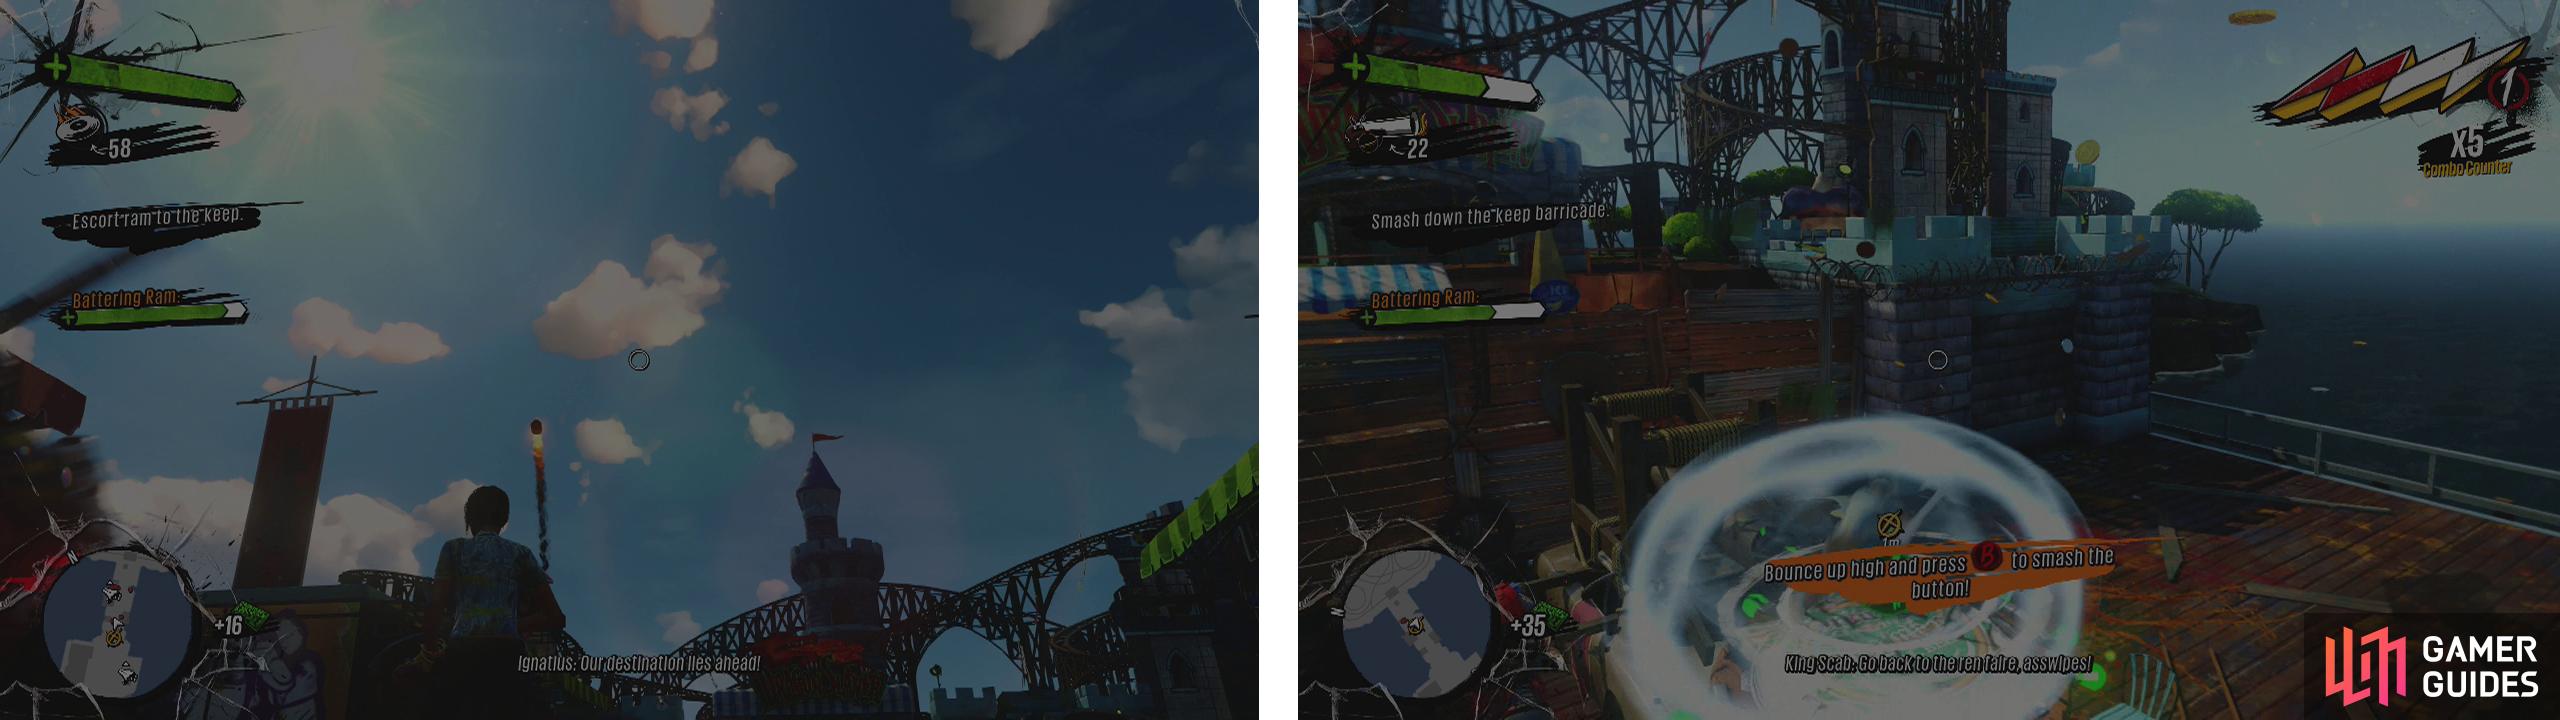 Shoot down the incoming cannon fire (left) and when the ram reaches a barricade perform a ground slam on the button (right).